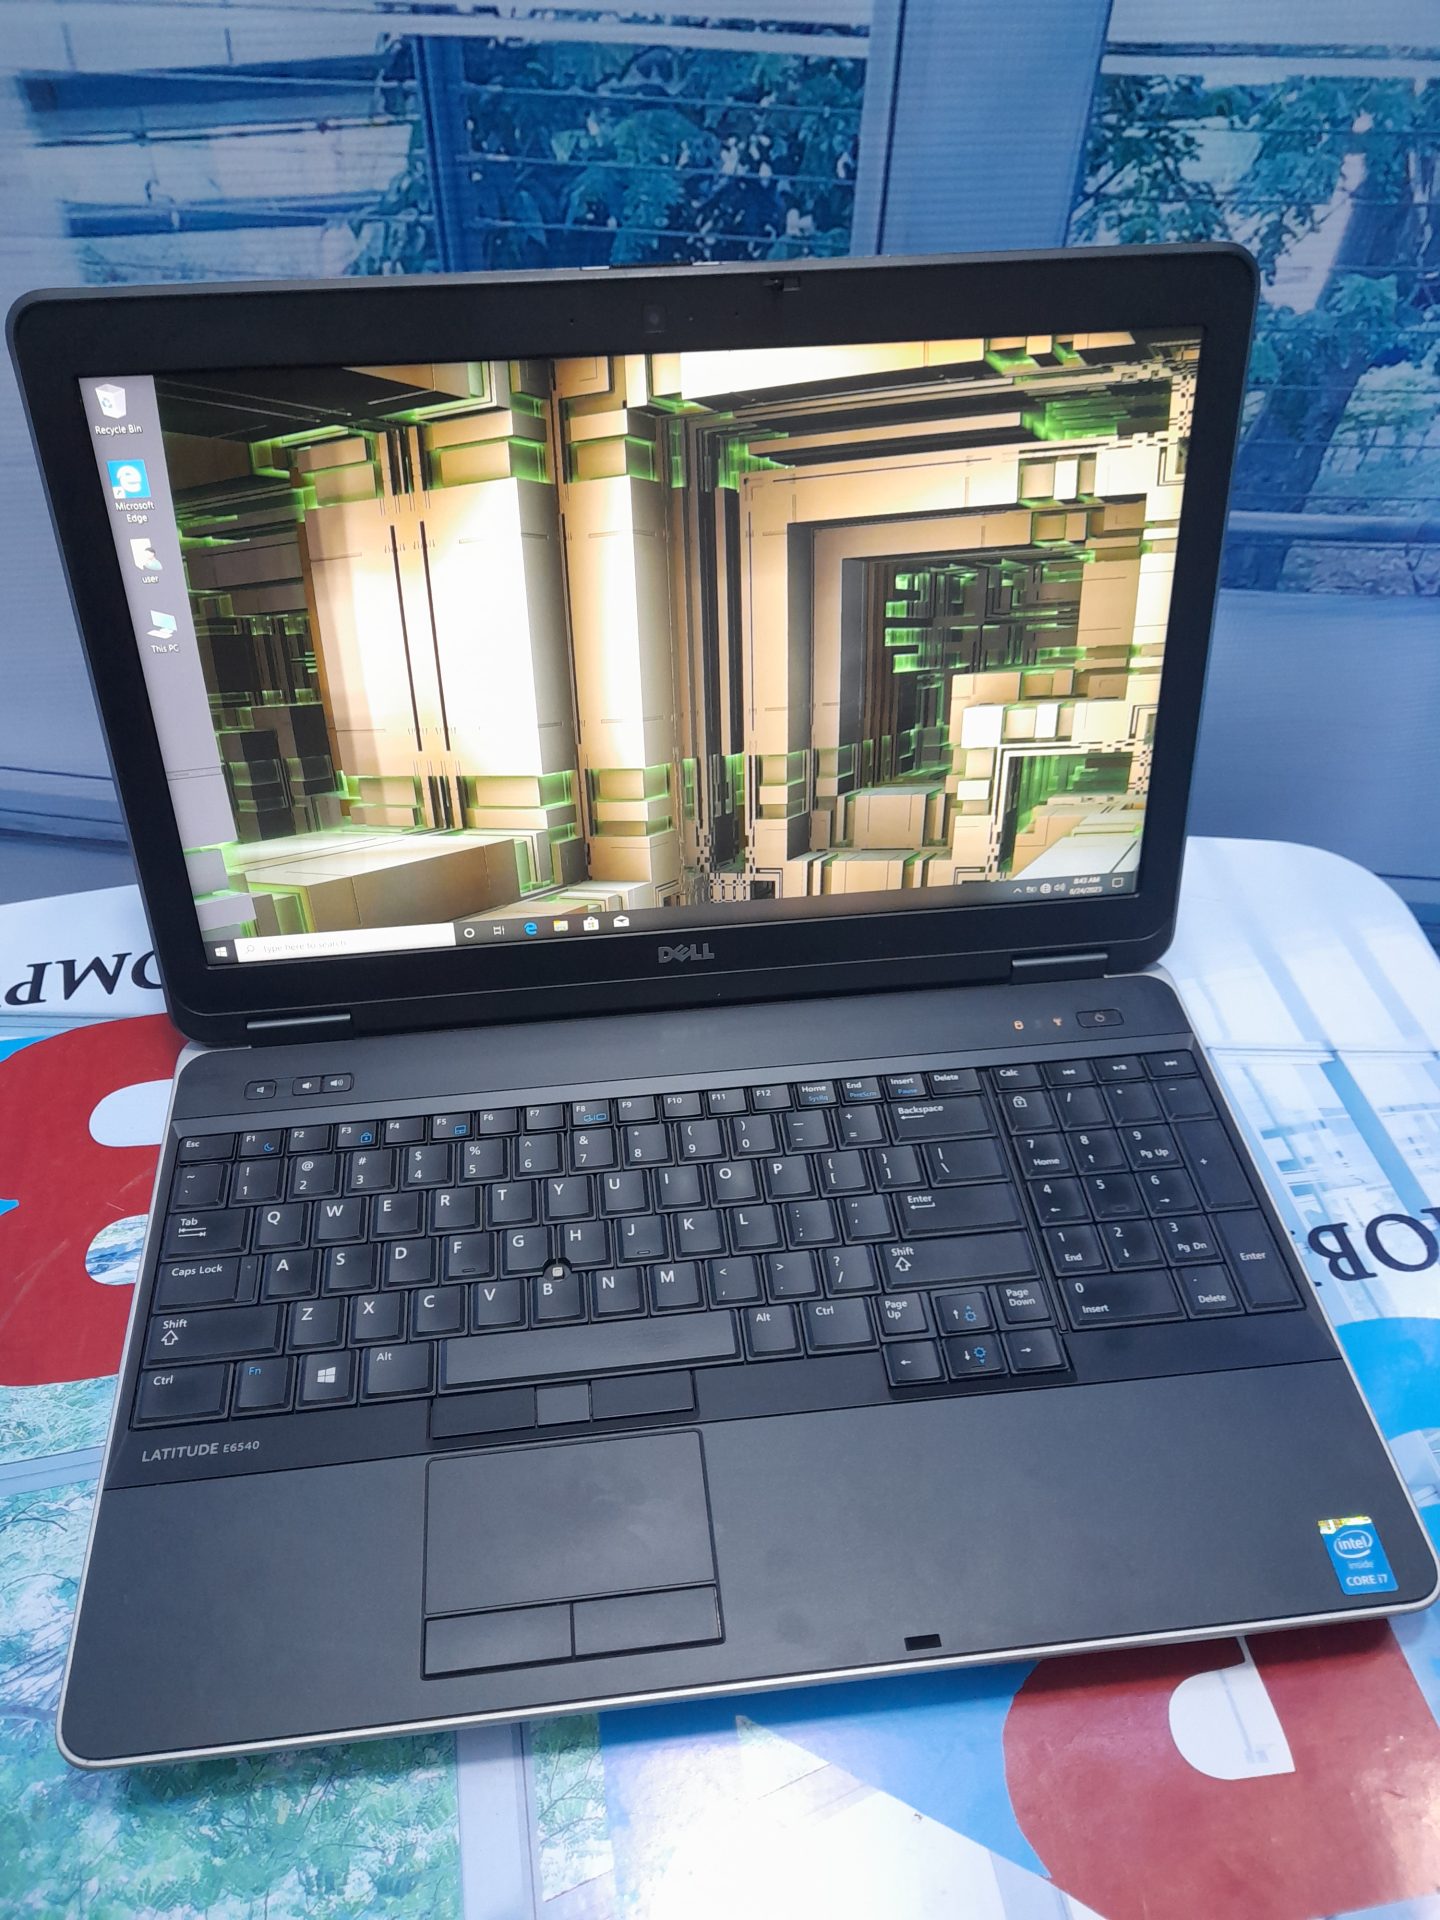 american used lenovo thinkpad T460s for sale in lagos computer village lagos, used laptops for sale, canada used laptops for sale in lagos computer village, affordable laptops for sale in ikeja compkuter village, wholesale computer shop in ikeja, best computer engineering shop in ikeja computer village, how to start laptop business in lagos, laptop for sale in oshodi, laptops for sale in ikeja, laptops for sale in lagos island, laptops for sale in wholesale in alaba international lagos, wholes computer shops in alaba international market lagos, laptops for sale in ladipo lagos, affordable laptops for sale in trade fair lagos,new american hp laptop arrival in ikeja, best hp laptops for sale in computer village, HP ProBook 450 G4 8GB Intel Core I5 HDD 1TB For sale in ikeja computer village,HP ProBook 450 G4 For sale in ikeja computer village,Dell Latitude 7250 Intel core i7, Lenovo ThinkPad T450 core i7 - 5th Gen. 500GB HDD 8GB RAM , Asus N550JK 8GB Intel Core I5 HDD+SSD 1TB,Dell LATITUDE 3440 intel core i5 320G 4g ram , HP 1040 G2 Intel core i5